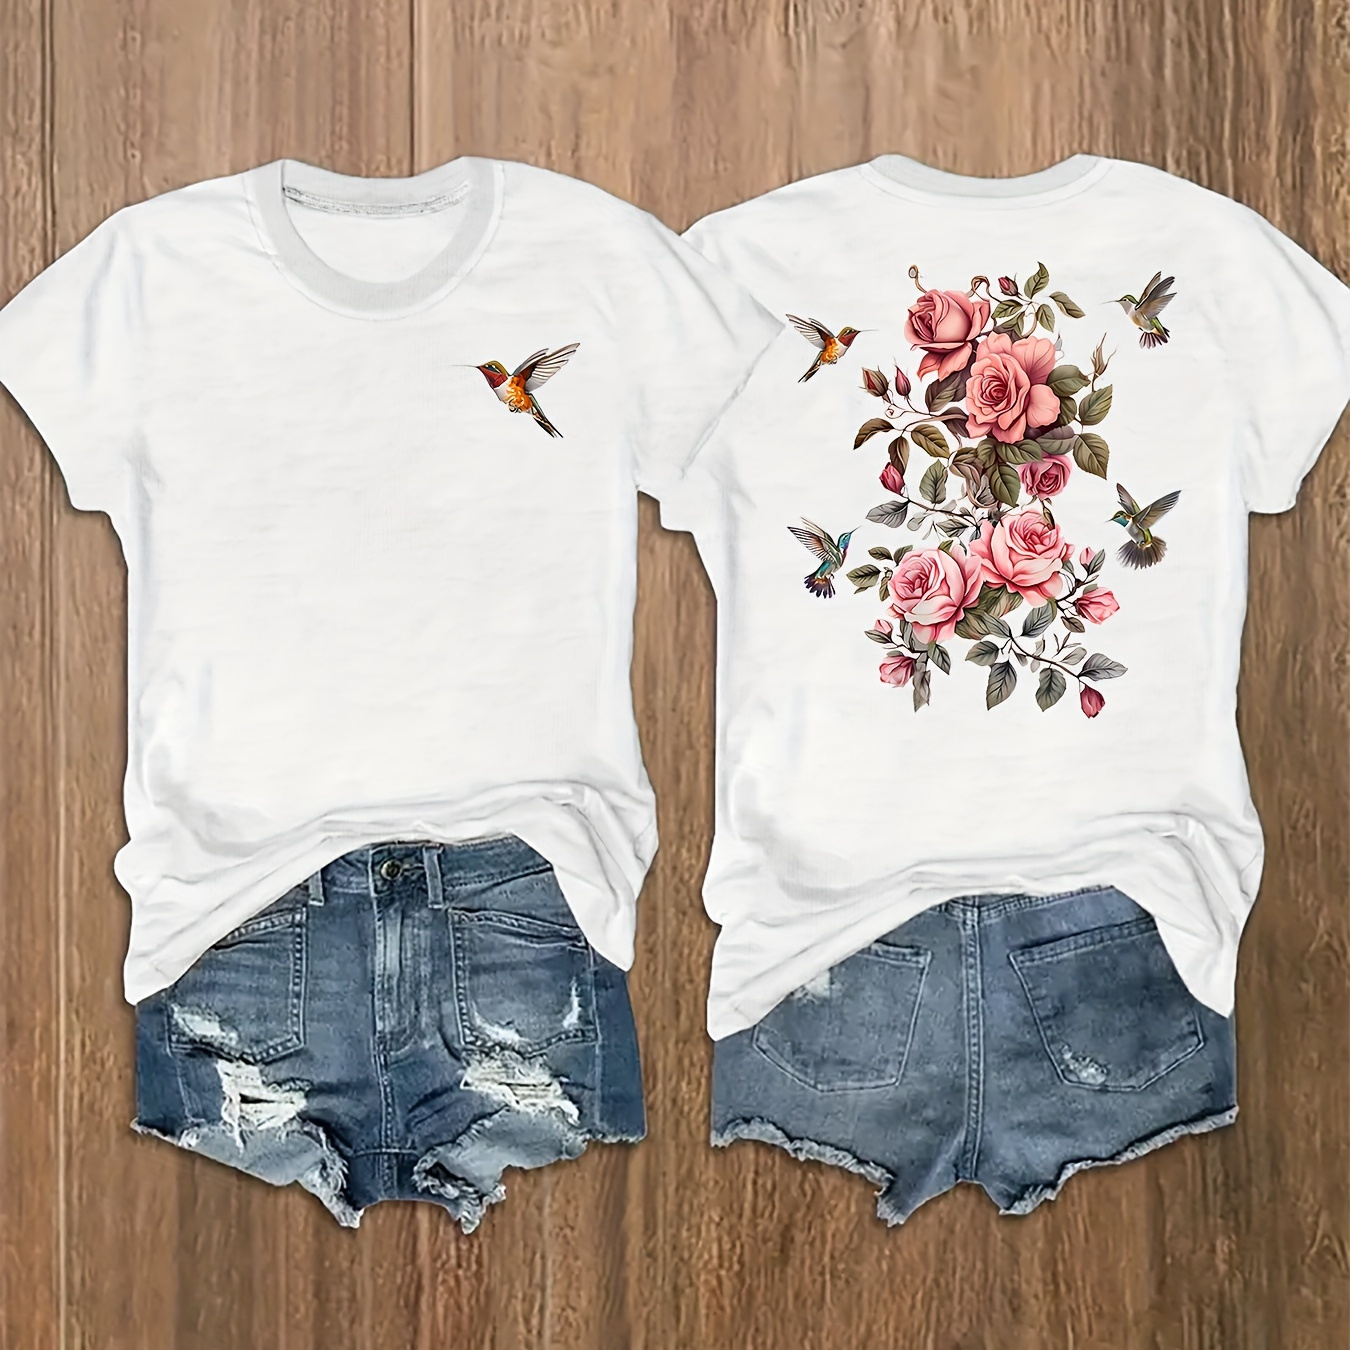 

Bird Floral Print T-shirt, Short Sleeve Crew Neck Casual Top For Summer & Spring, Women's Clothing